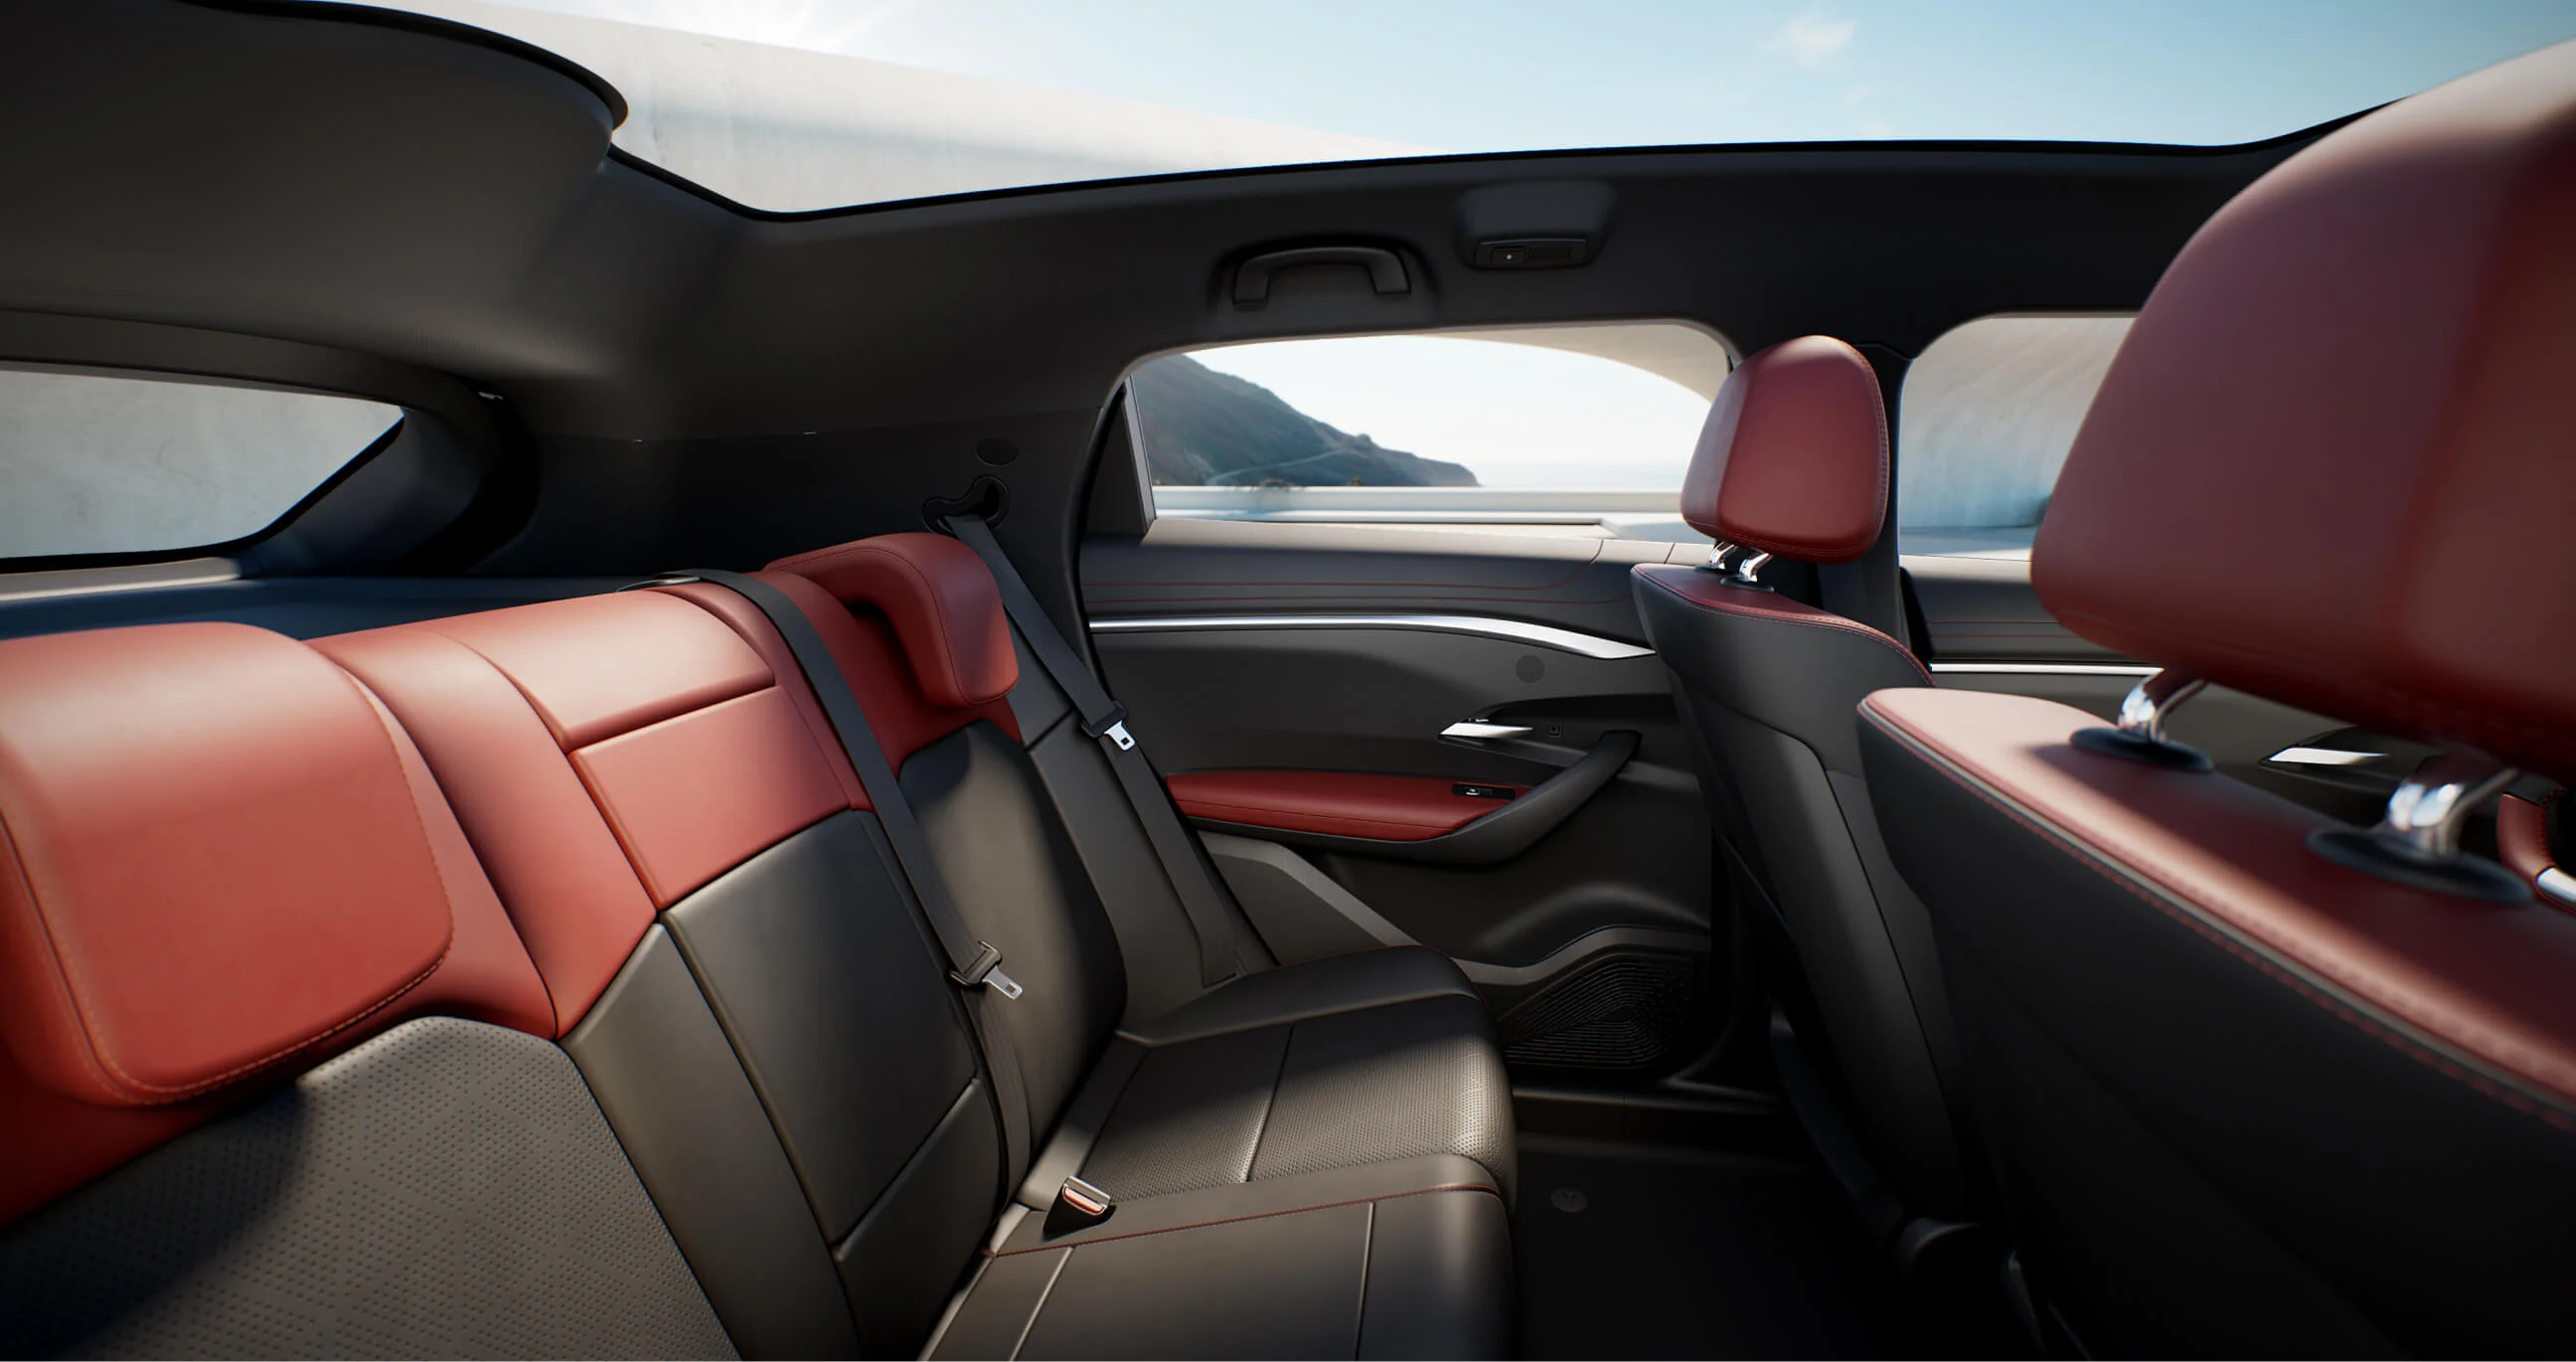 The VF 7 offers spacious legroom, 5 vegan leather seats, and a panoramic sunroof